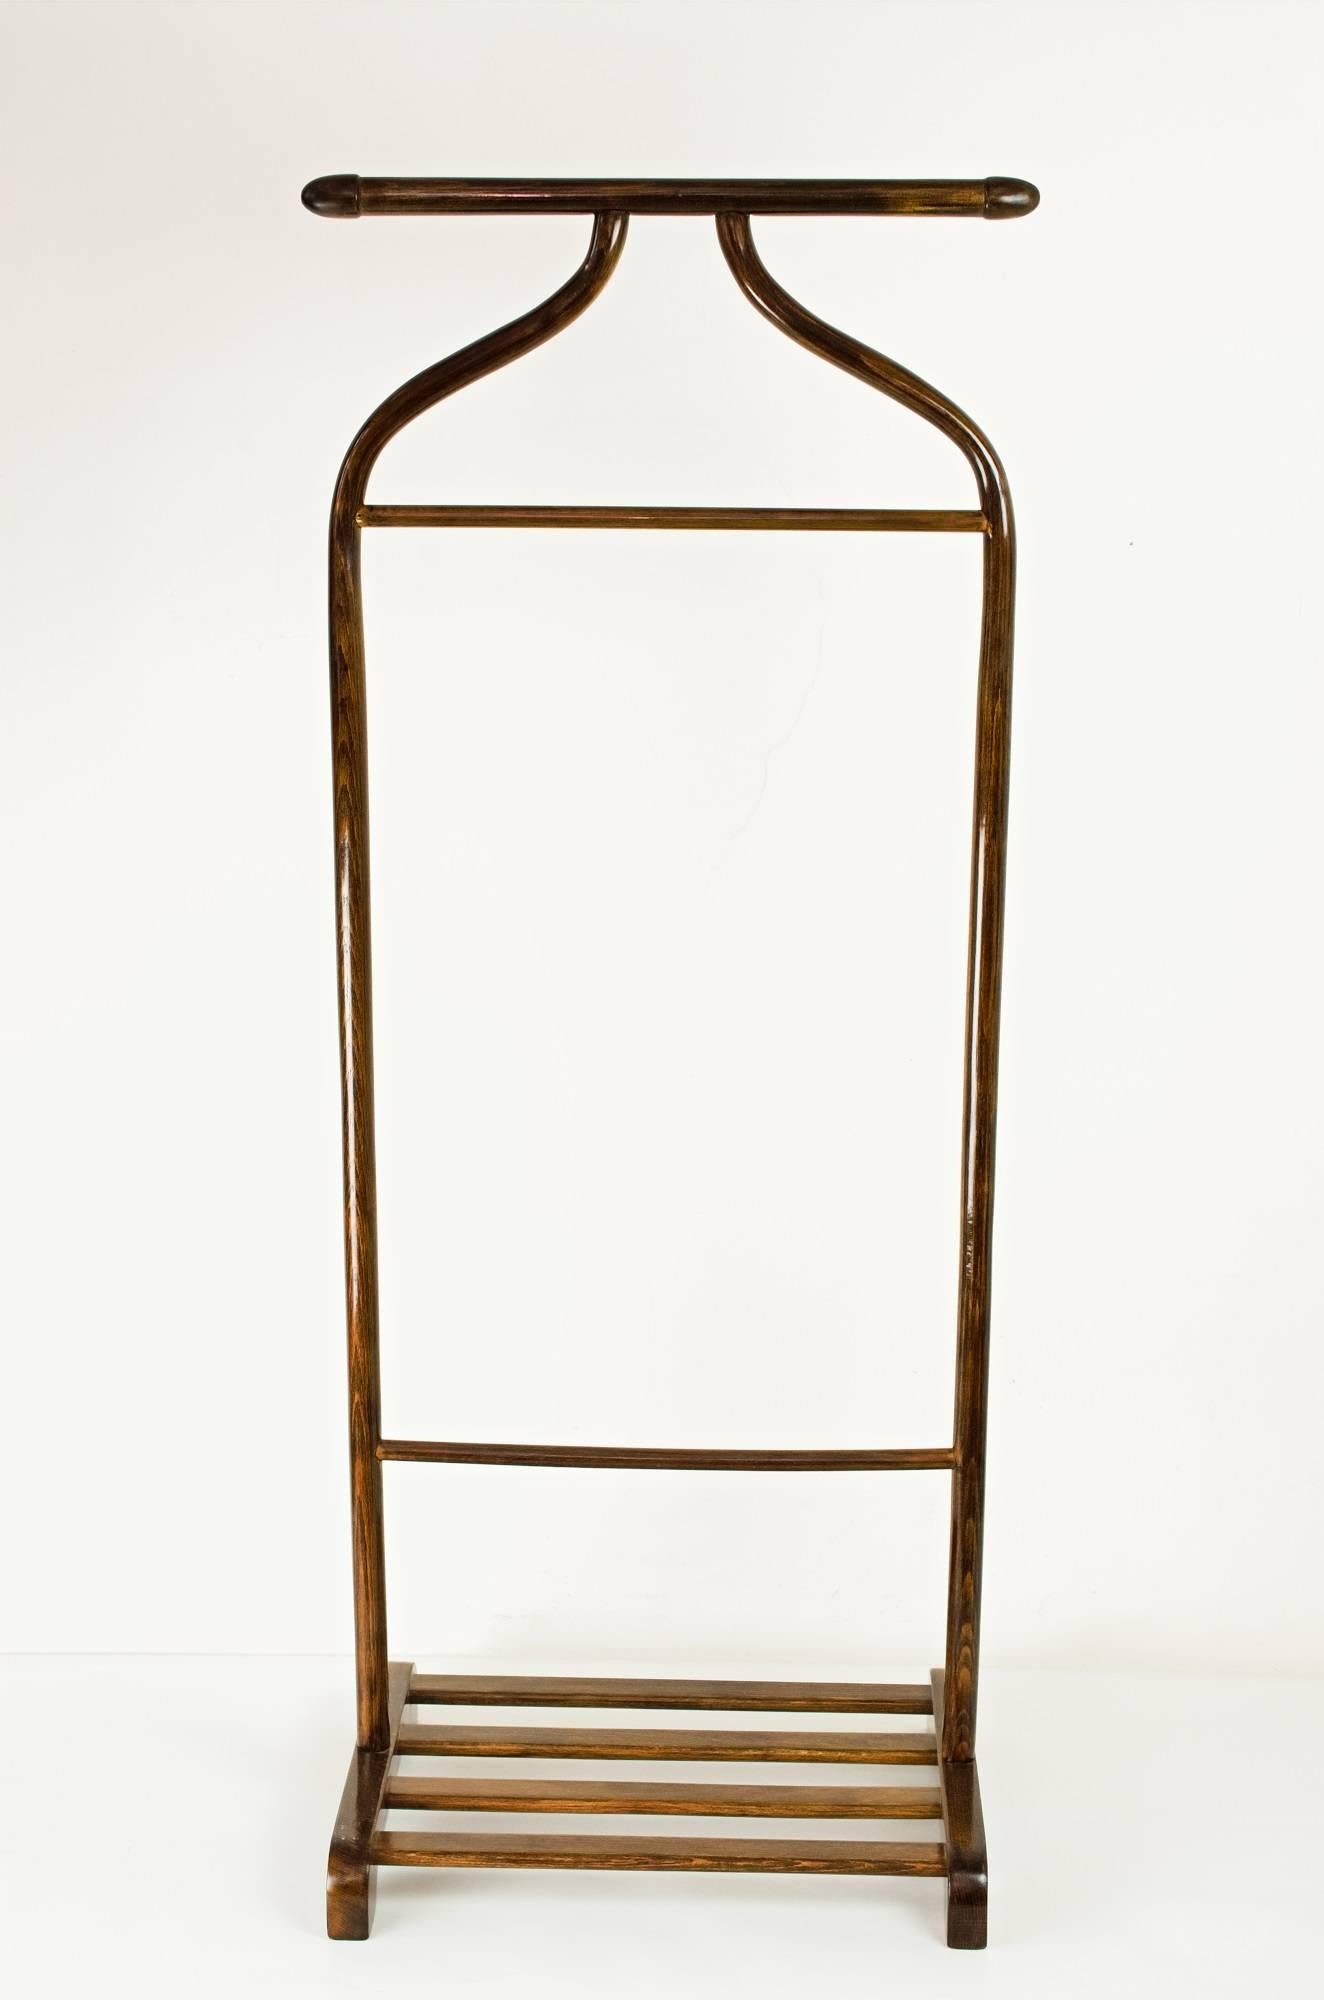 Coat stand by Thonet
Polished.